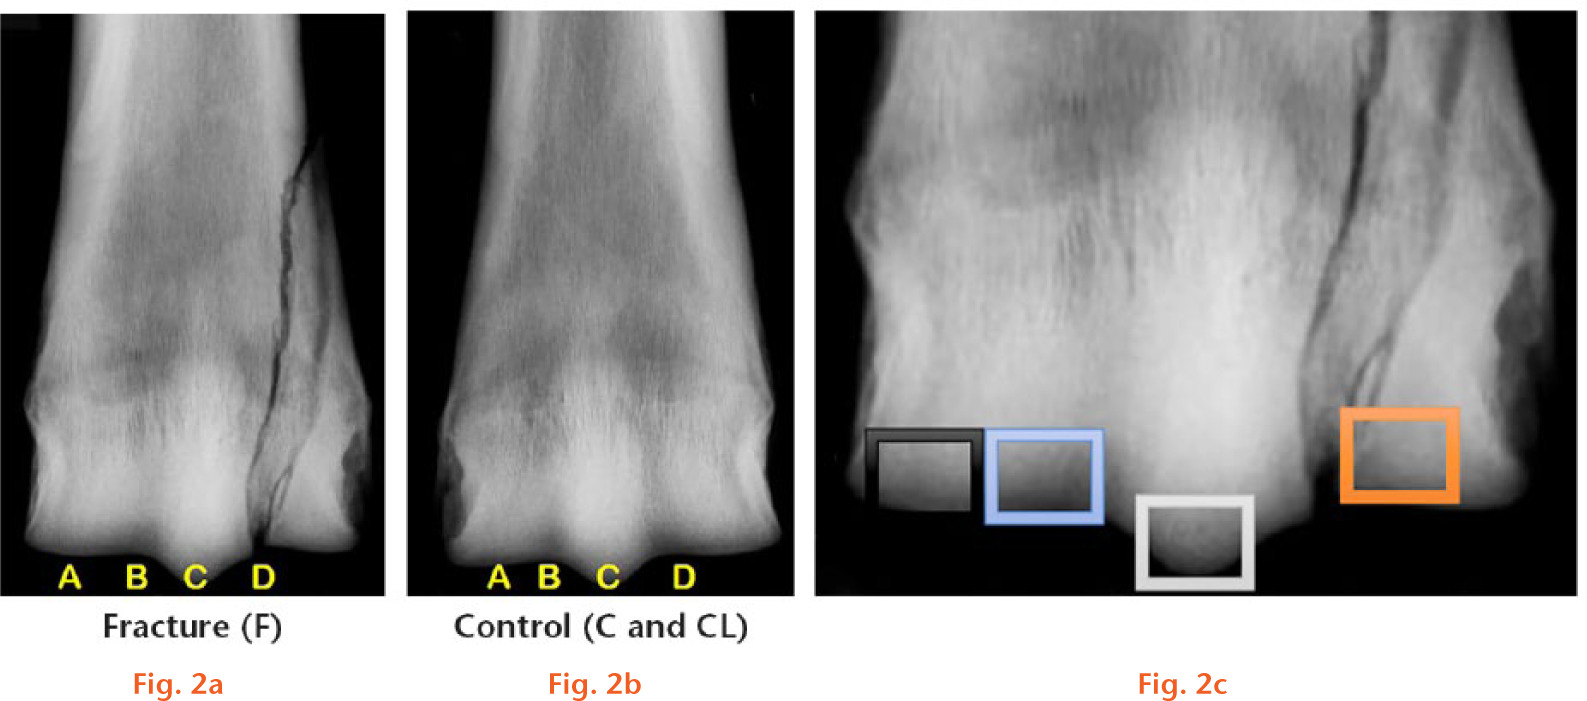  
            Dorsopalmar radiographs of a) fractured third metacarpal bone and b) control and contralateral bone. The different regions used in the analysis of staining are shown. A, medial condyle; B, medial condylar groove; C, sagittal ridge; D, lateral condylar fracture site. In c), the sampling site regions are shown, corresponding to A to D in a) and b).
          